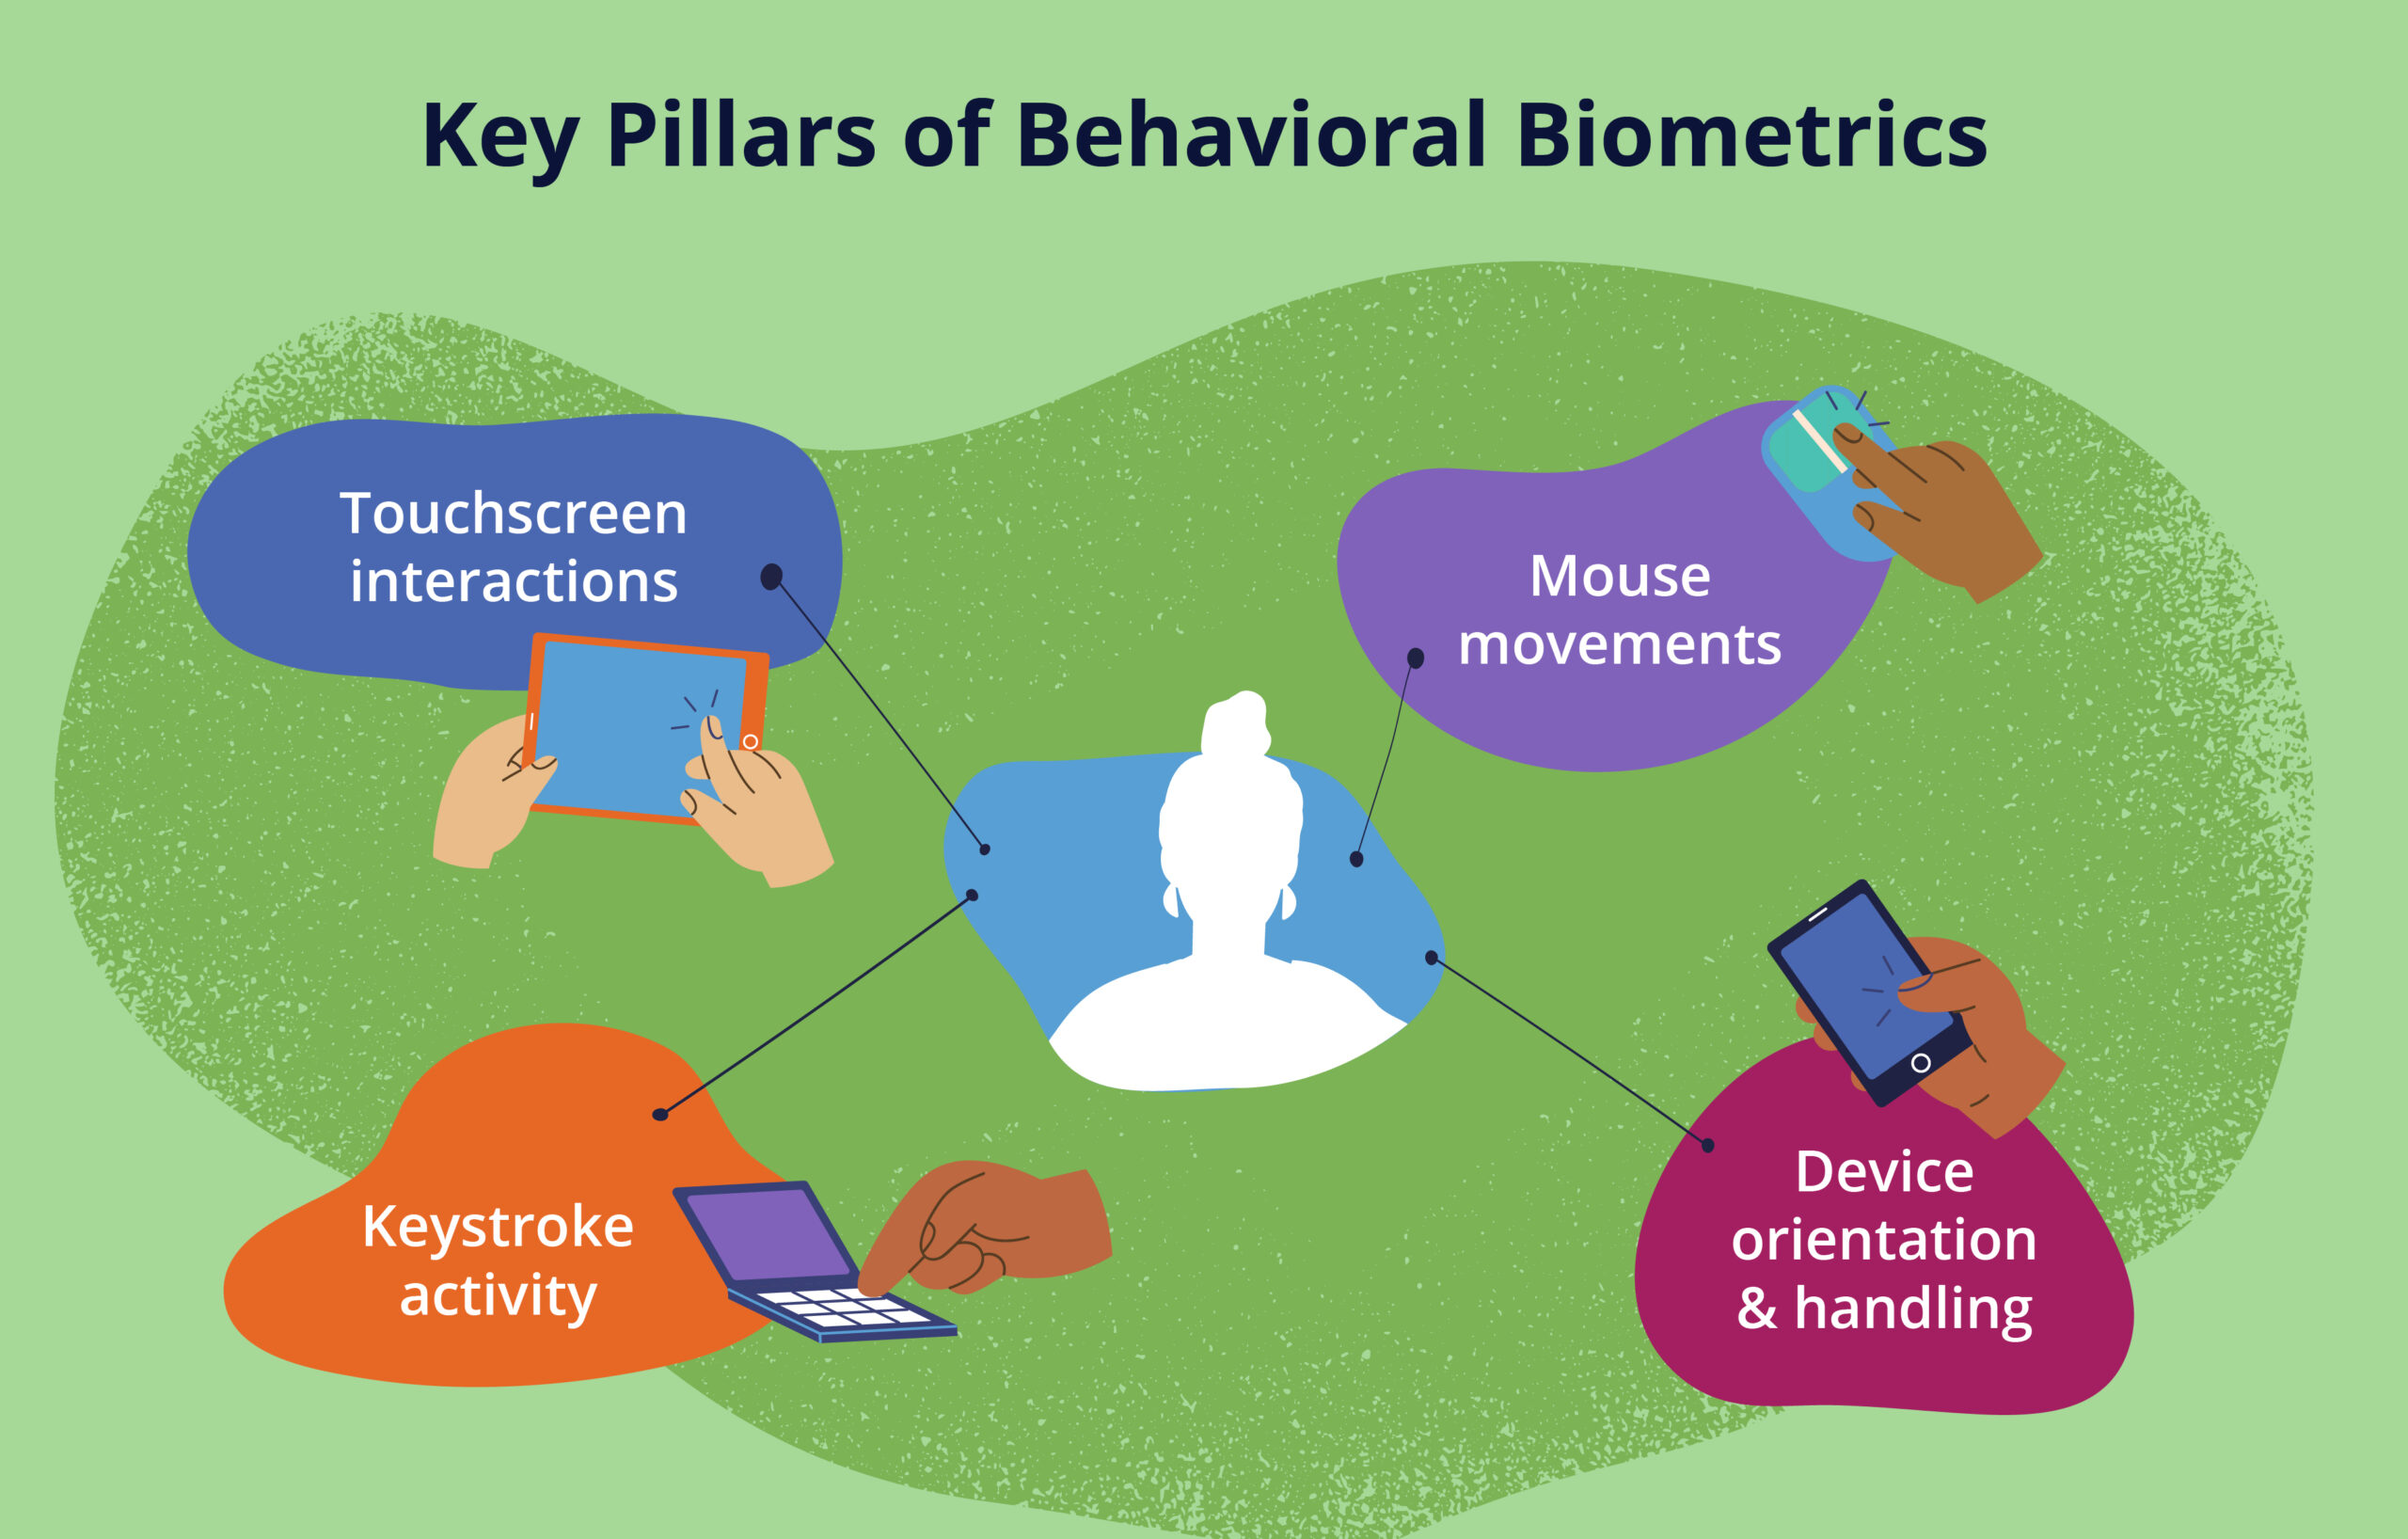 Image of key pillars of behavioral biometrics, touchscreen interactions, keystroke activity, mouse movements, and device orientation and handling